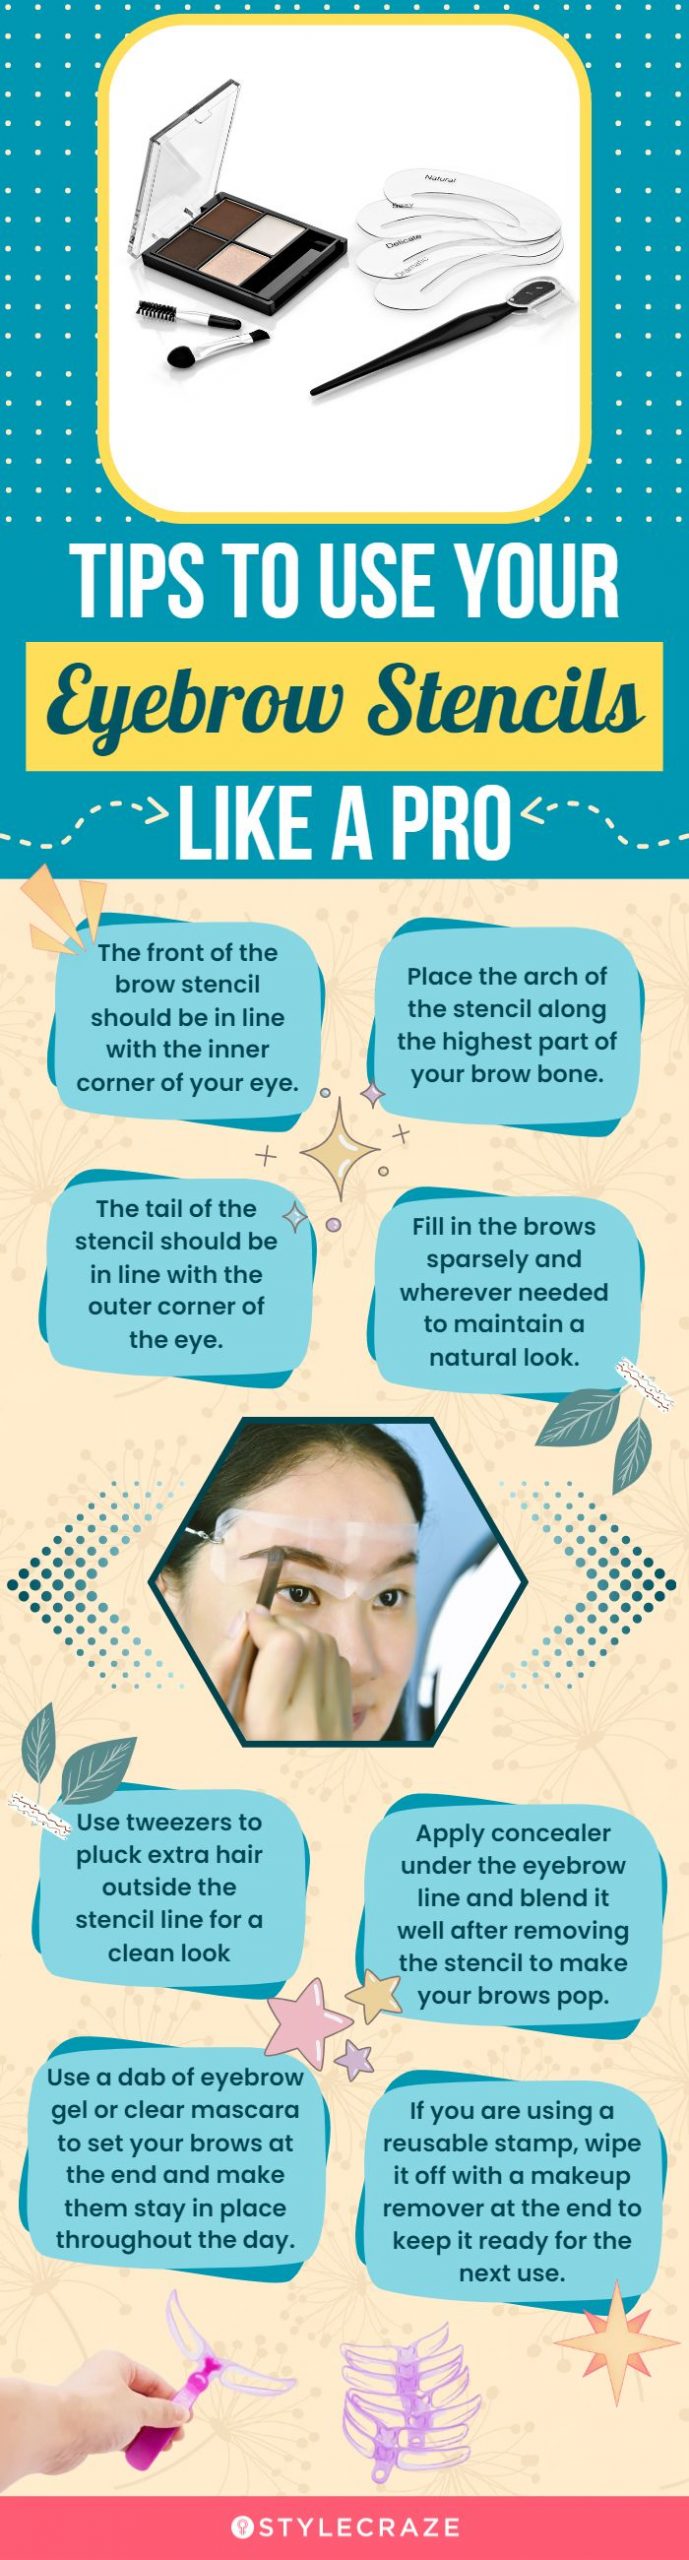 Tips To Use Your Eyebrow Stencils Like A Pro (infographic)